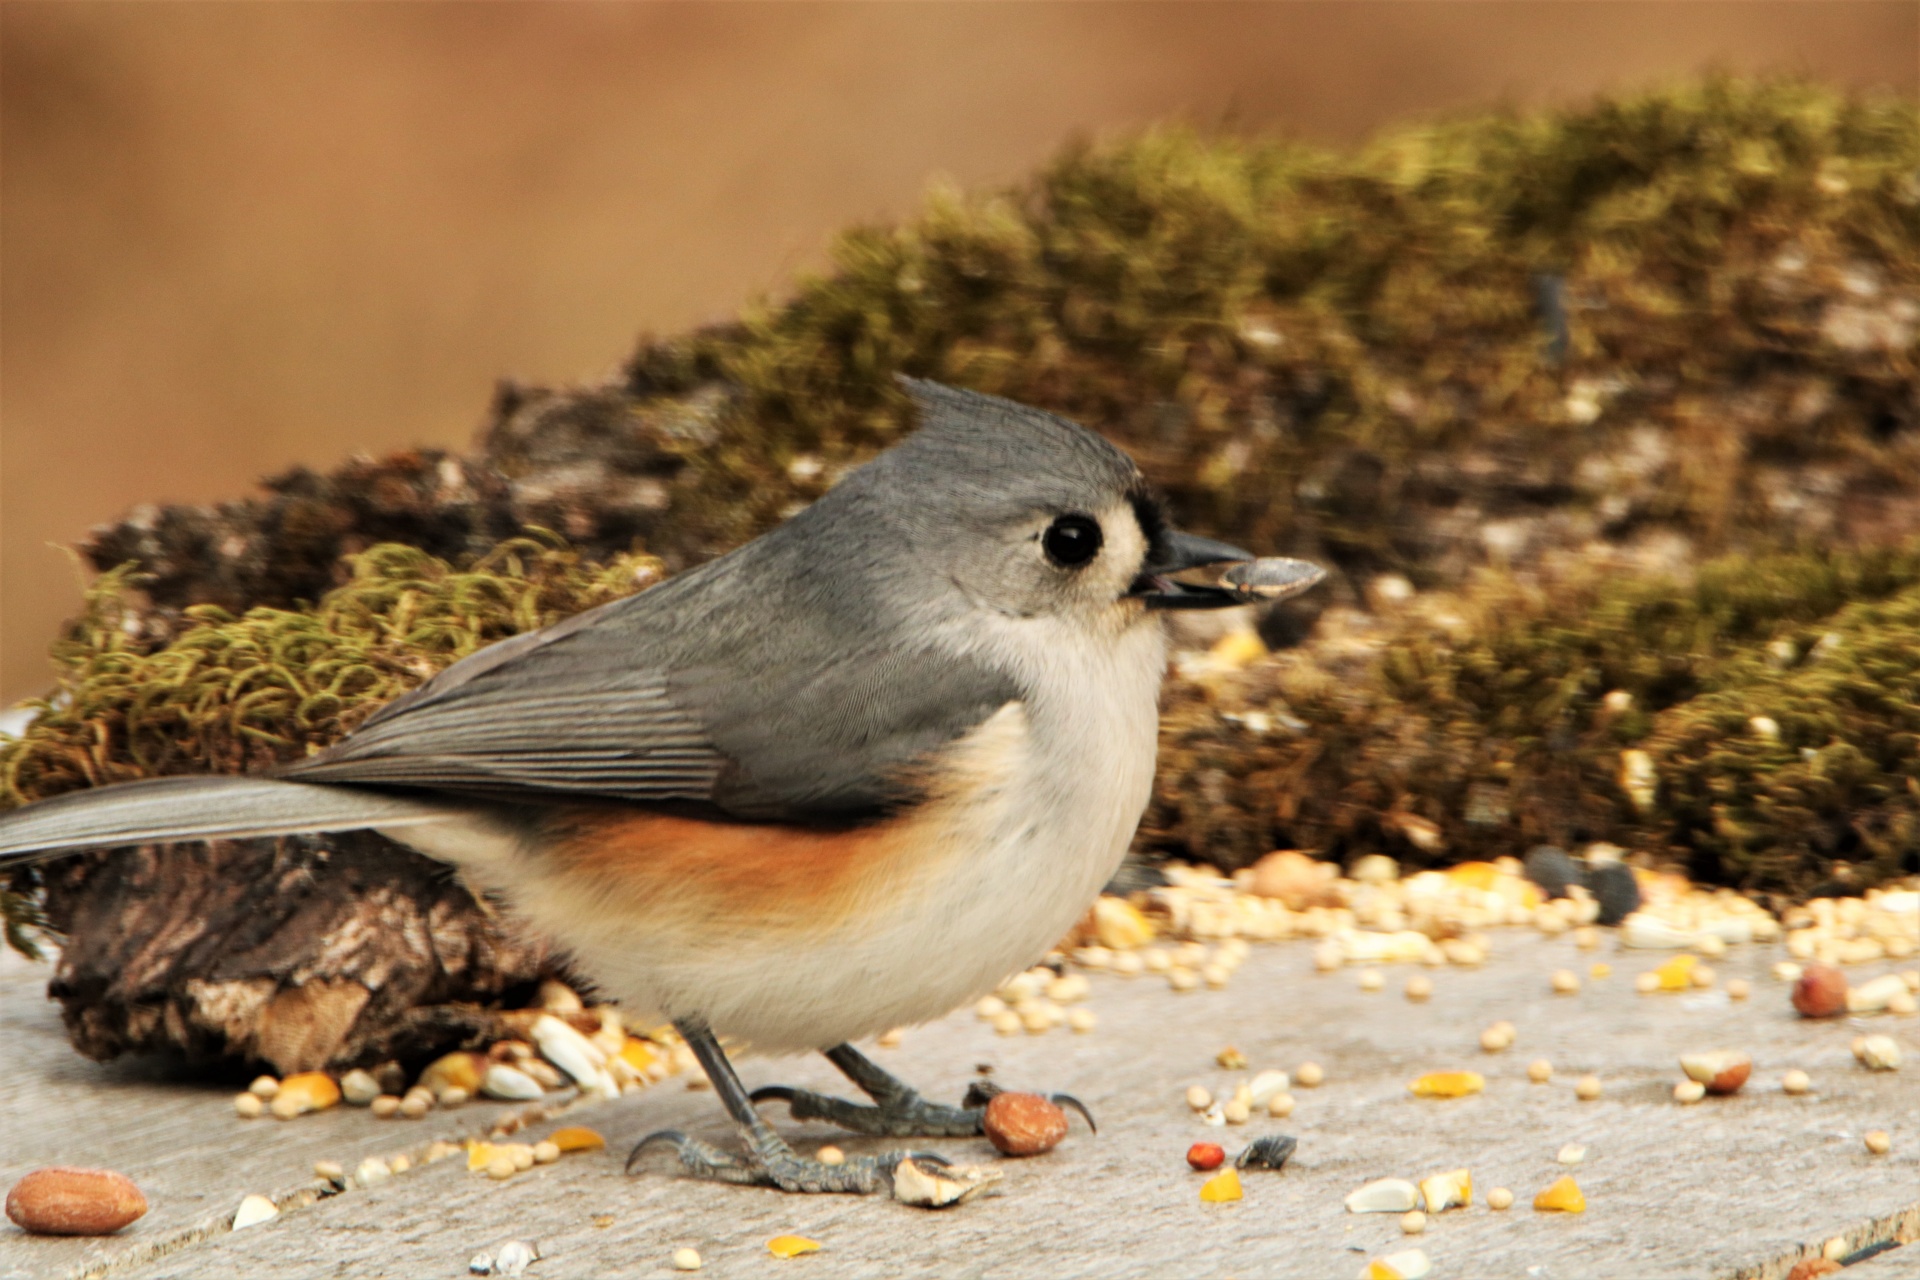 Close-up of a tufted titmouse bird on a table with bird seed, holding a seed in its beak.